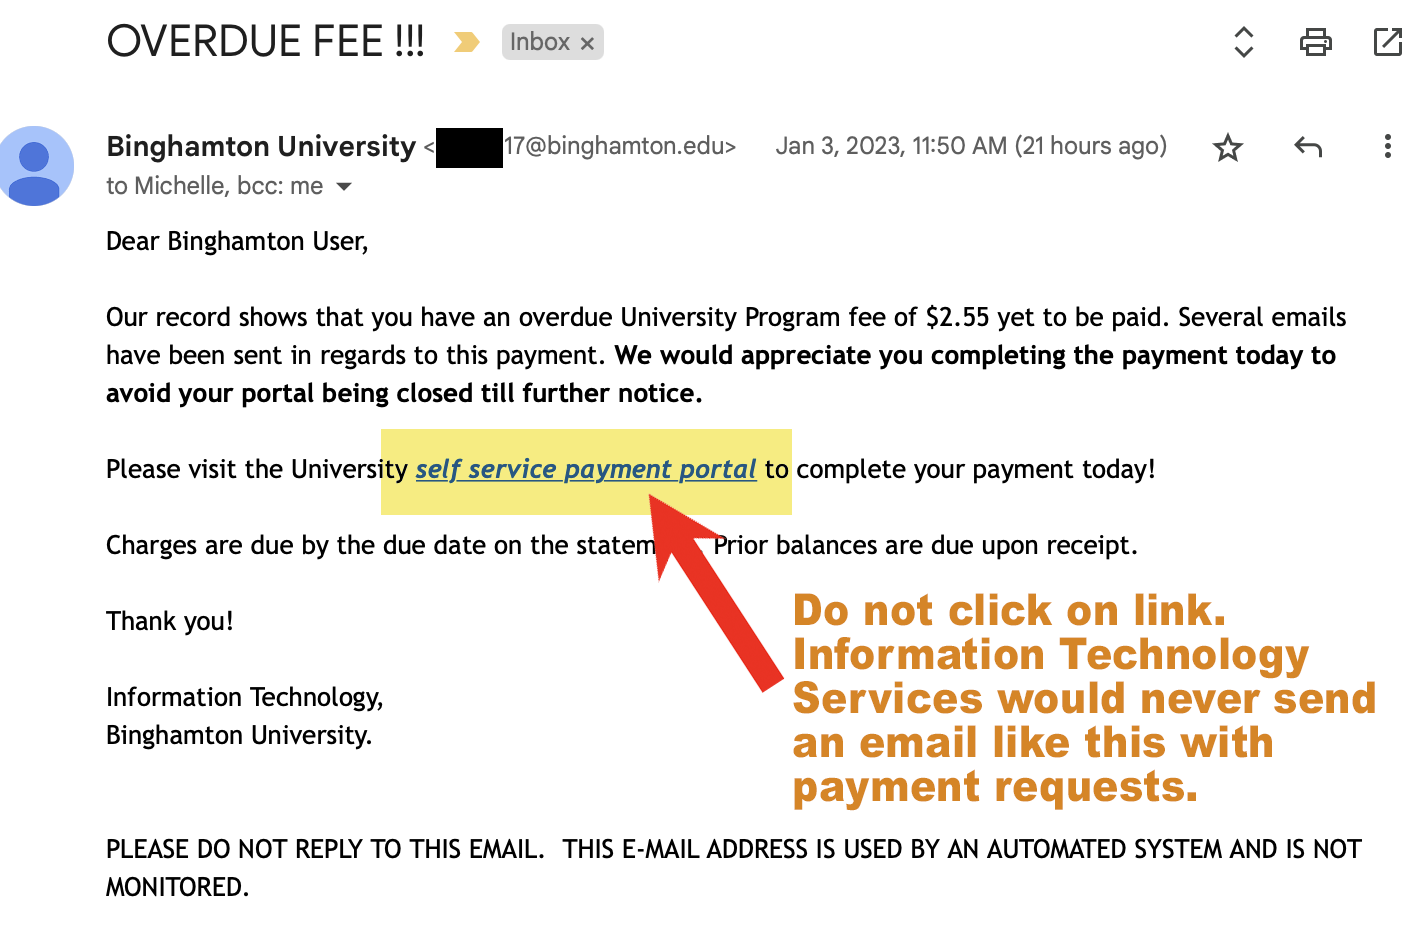 An image related to a campus payment request scam.